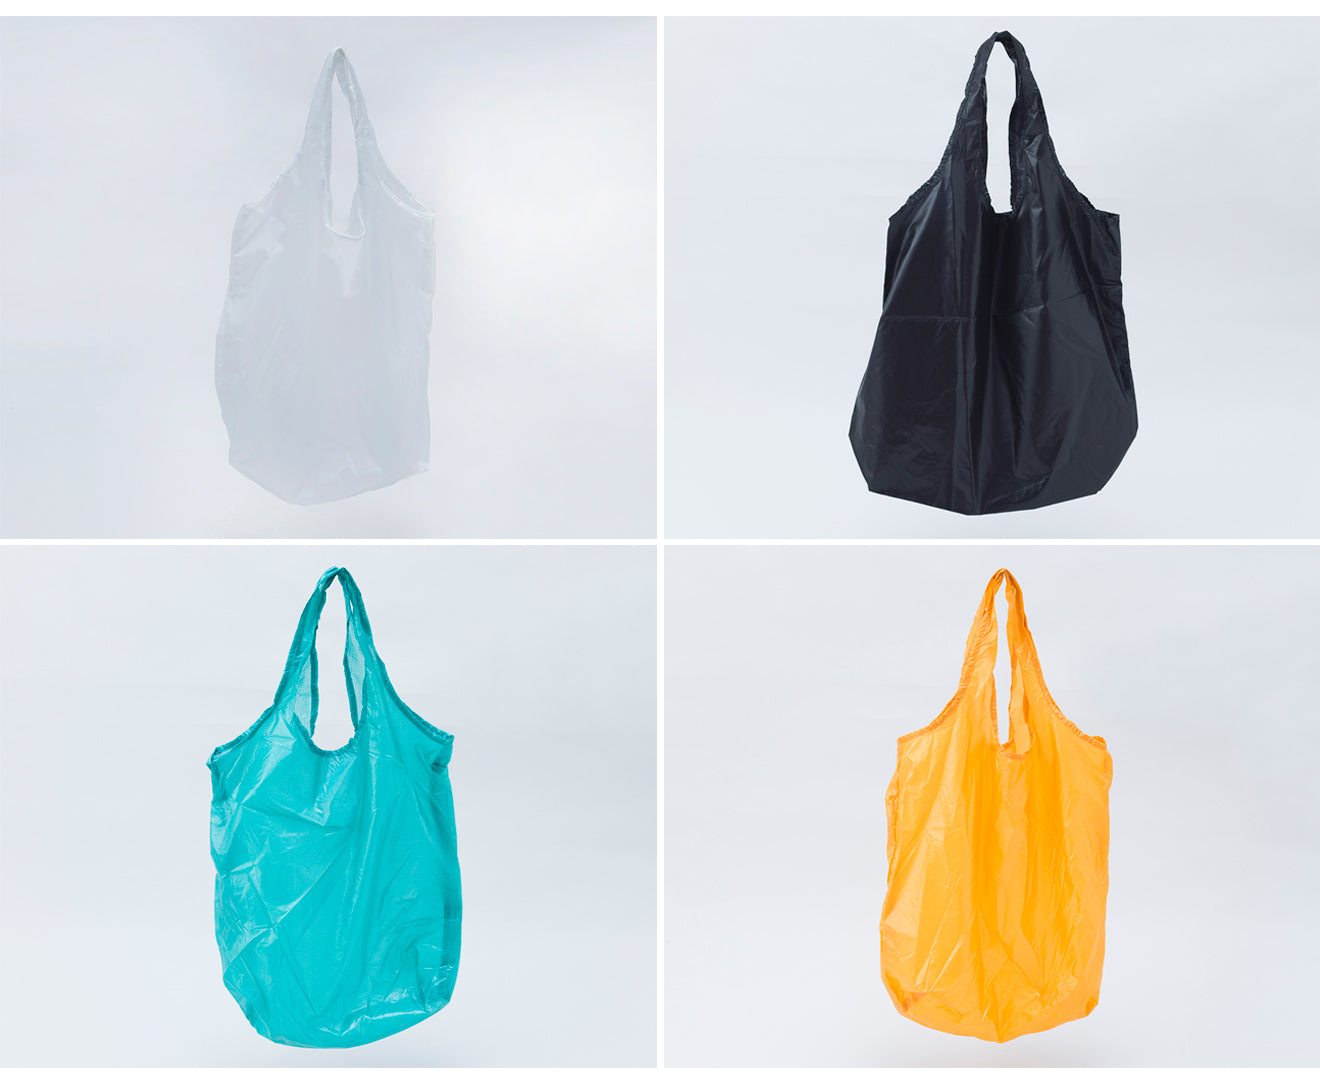 7 Eco Bags That Meet Function and Style | Tokyo Weekender